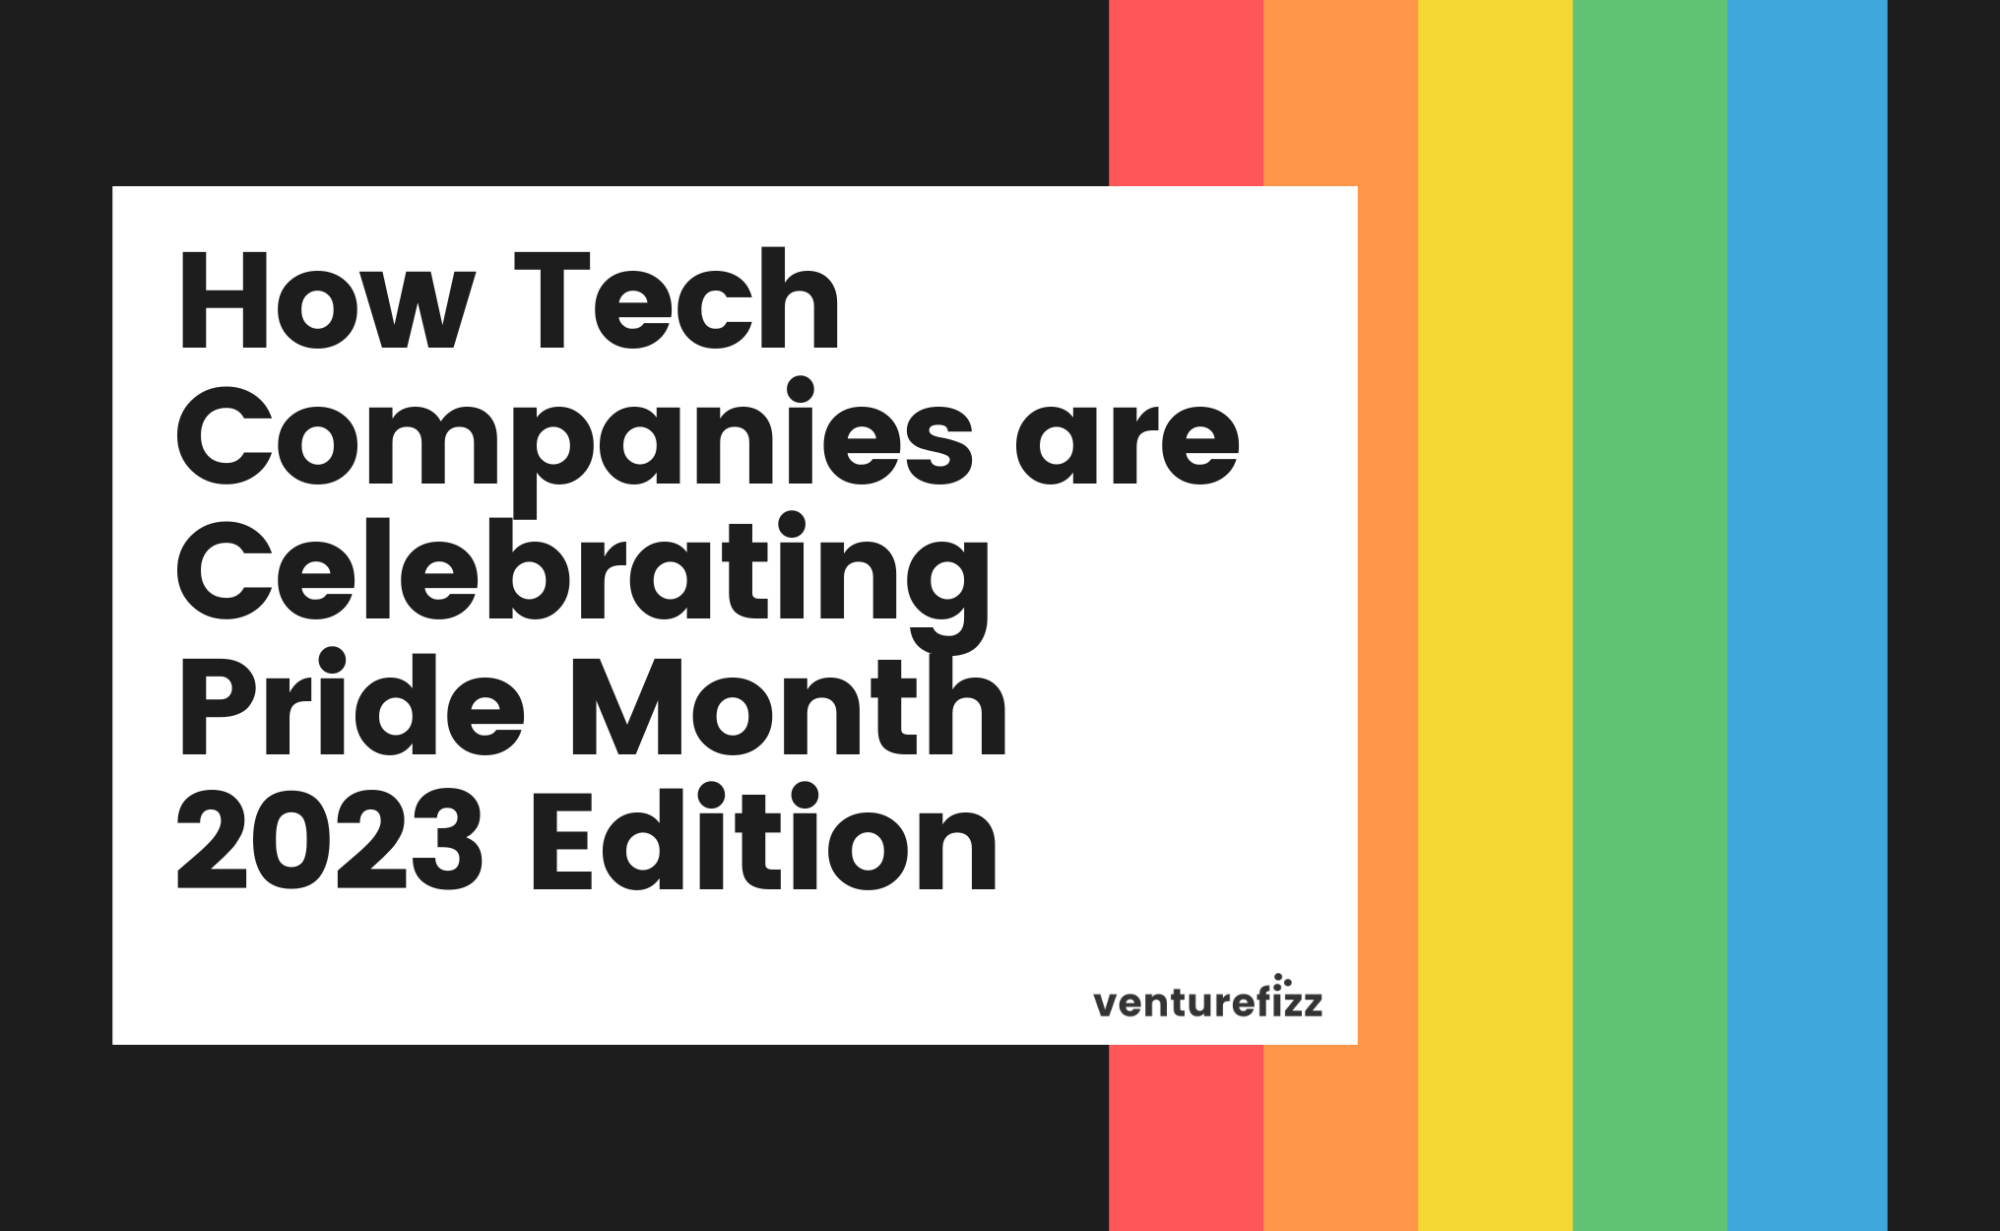 How Tech Companies are Celebrating Pride Month 2023 Edition banner image